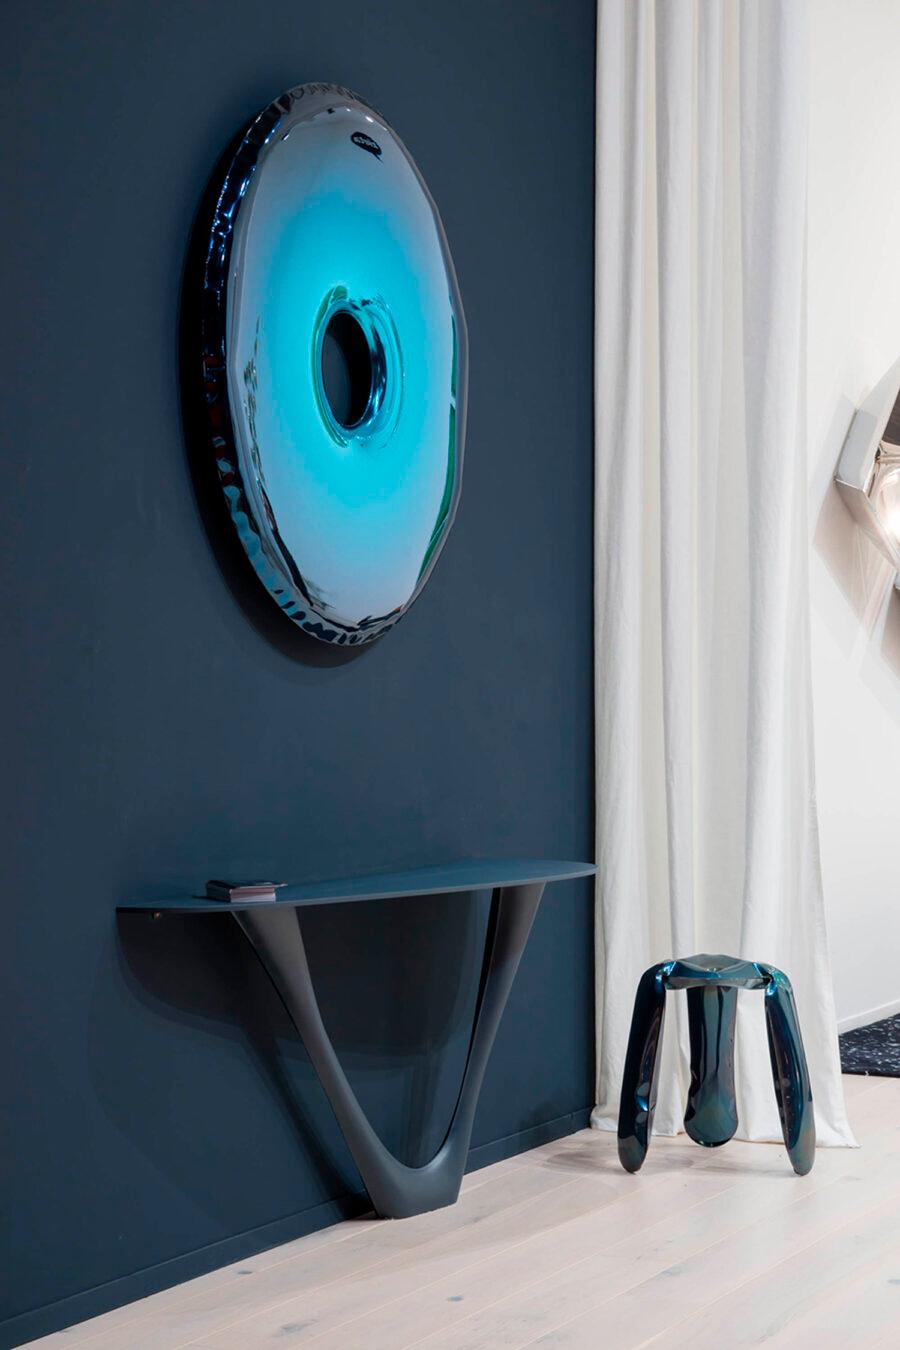 Rondo mirror 'Deep Space Blue' by Zieta Prozessdesign
Gradient collection, Deep space blue

Stainless steel
Measures: 150 x 6 cm.

Several sizes available: 
Diameter: 75 cm / 95 cm / 150 cm
(120cm: sold out)



Zieta is best known for